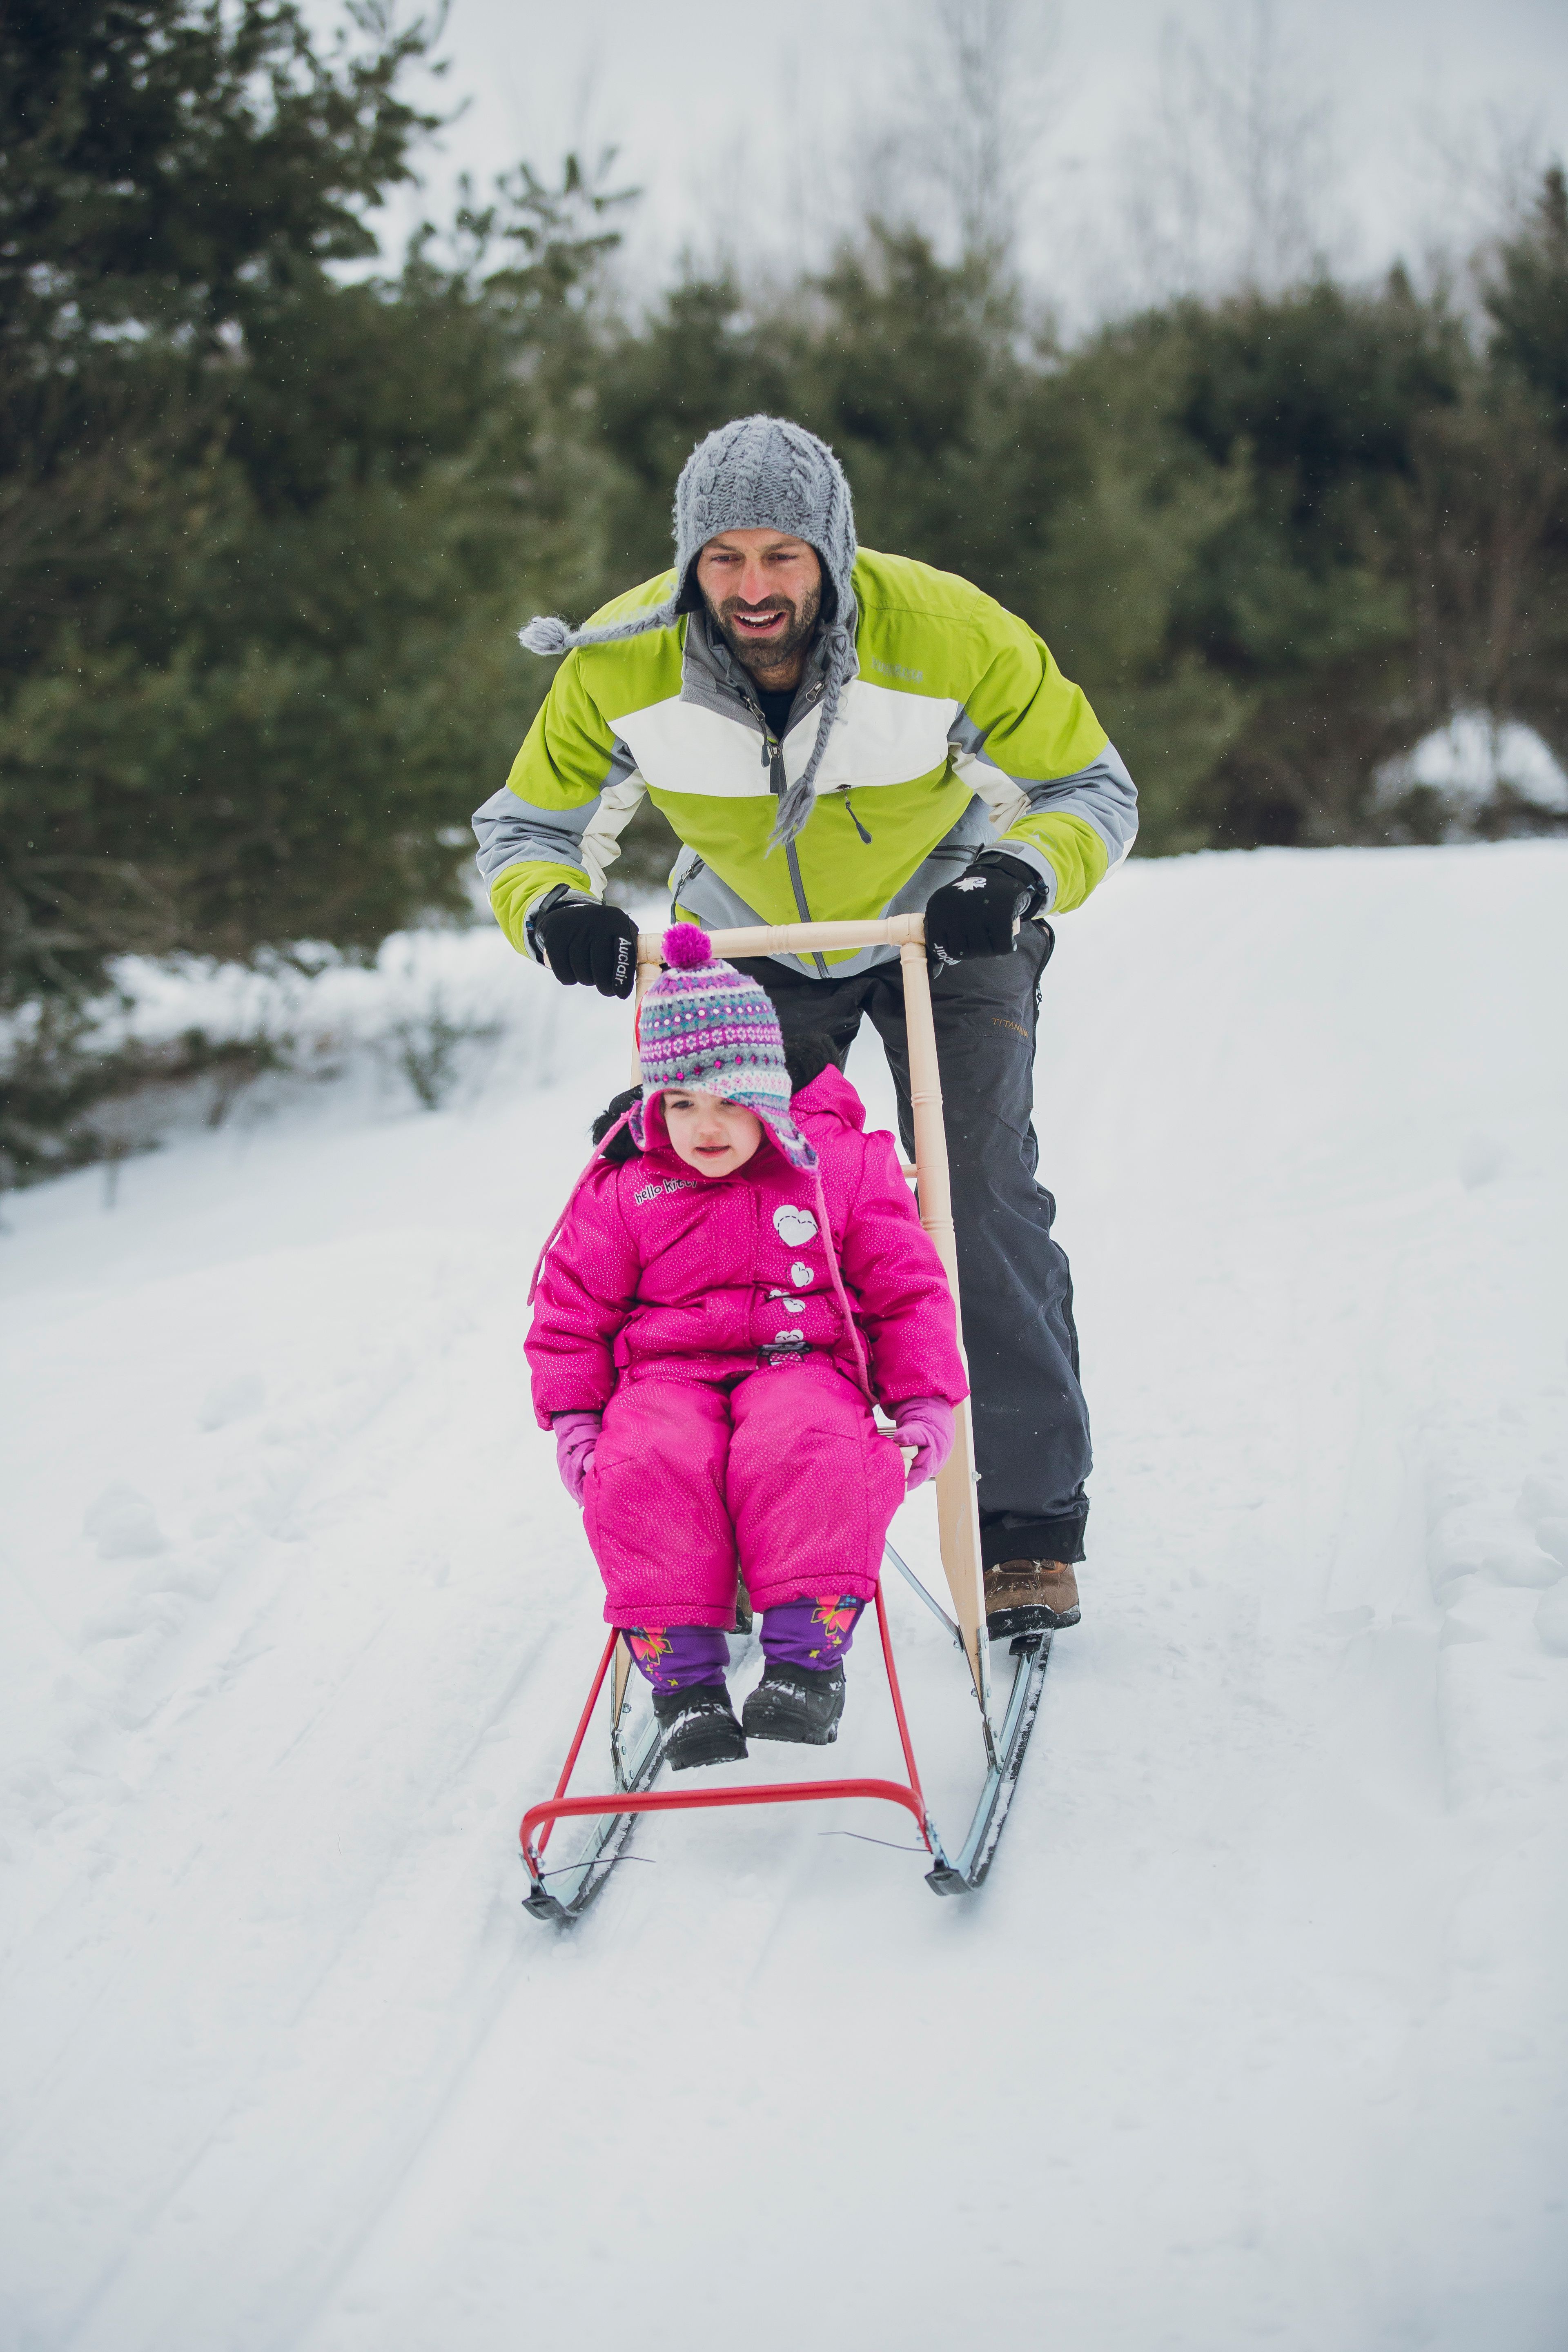 A  smiling man pushes a child on a kicksled through the snow. There is conifer forest in the background and snow is falling.